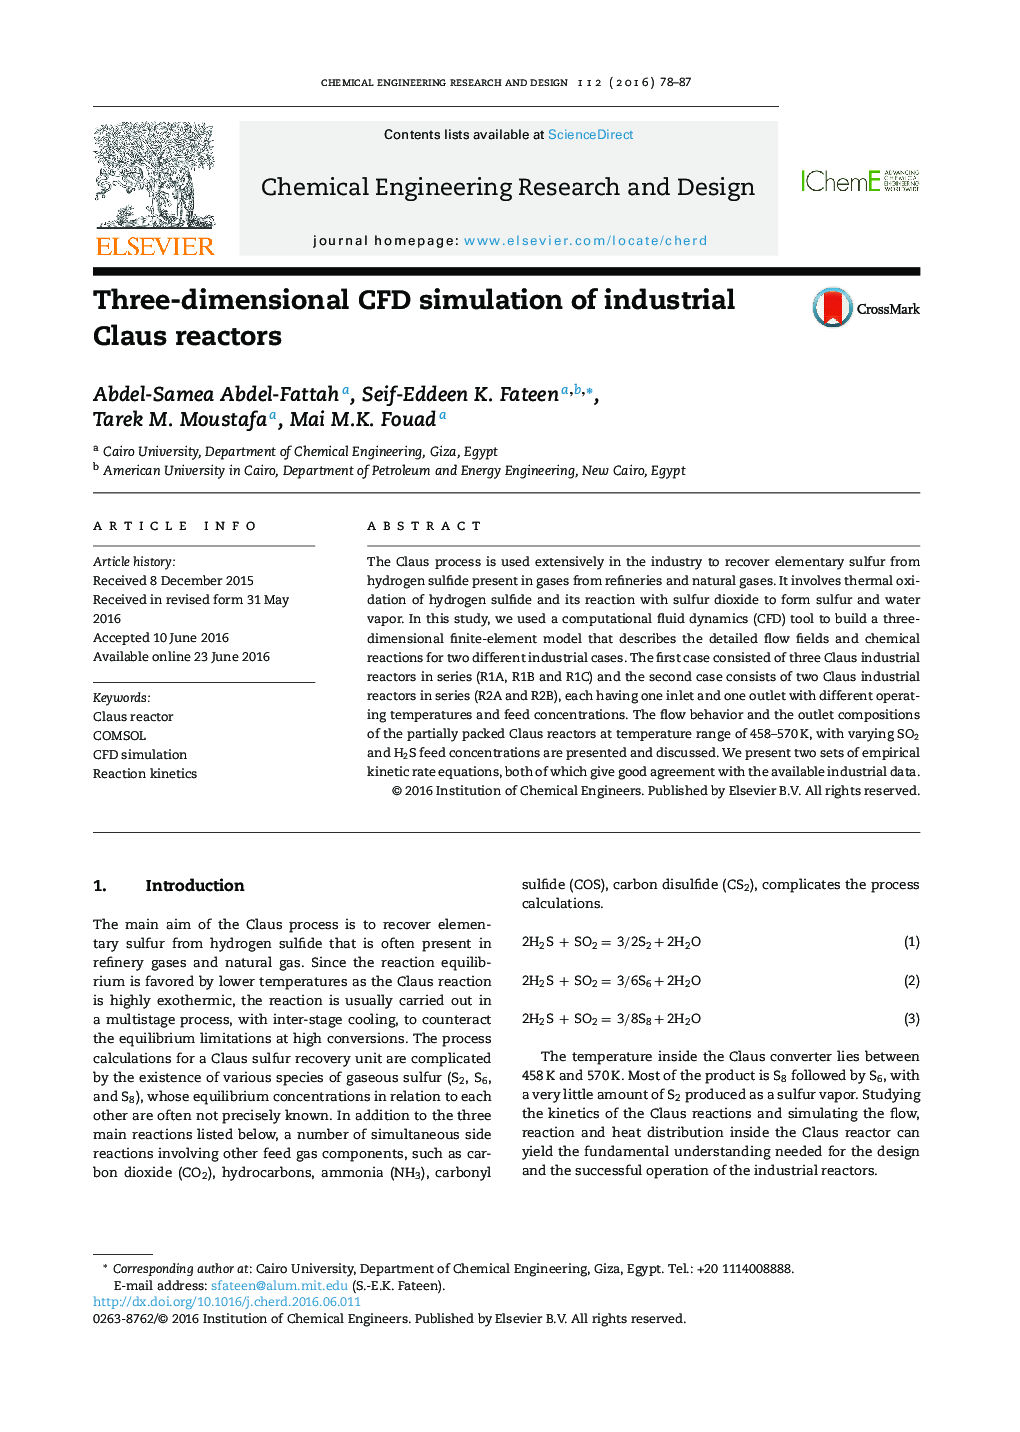 Three-dimensional CFD simulation of industrial Claus reactors